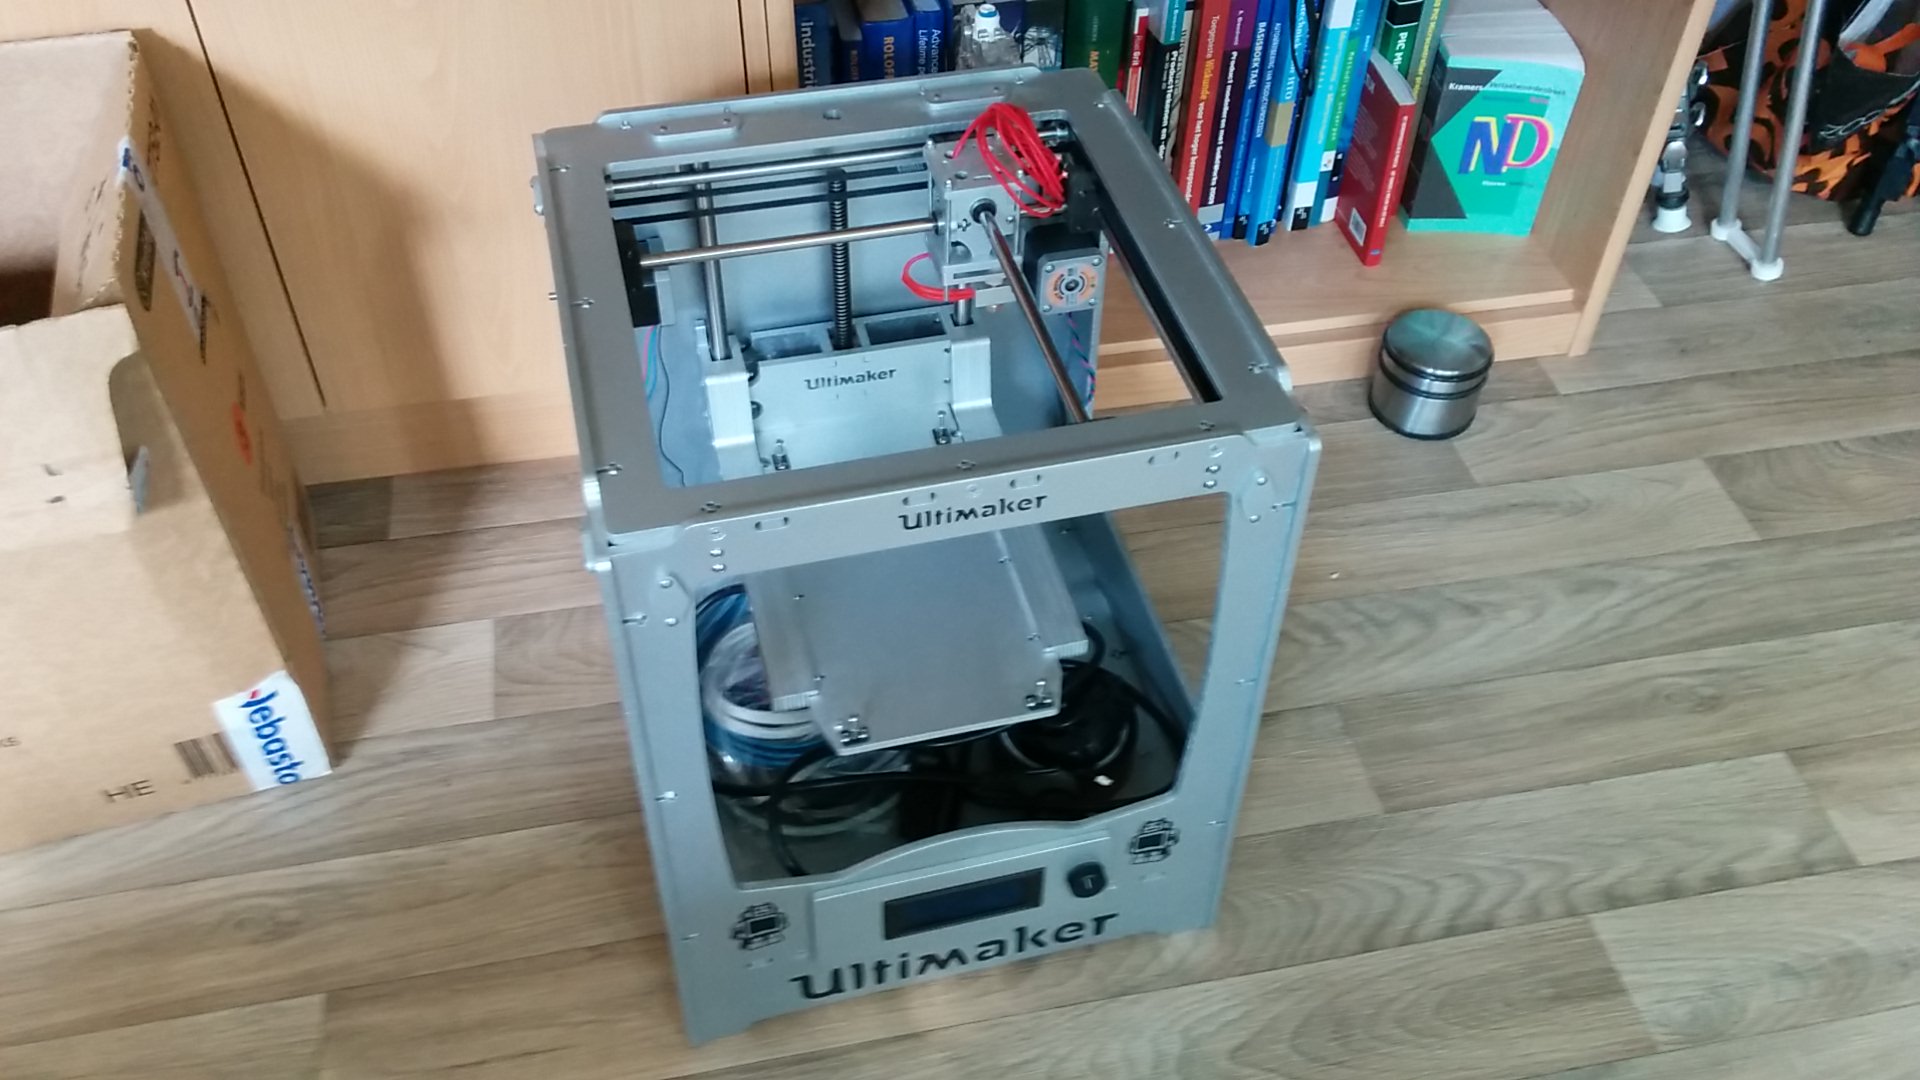 New, shiny, to-be-finished Ultimaker